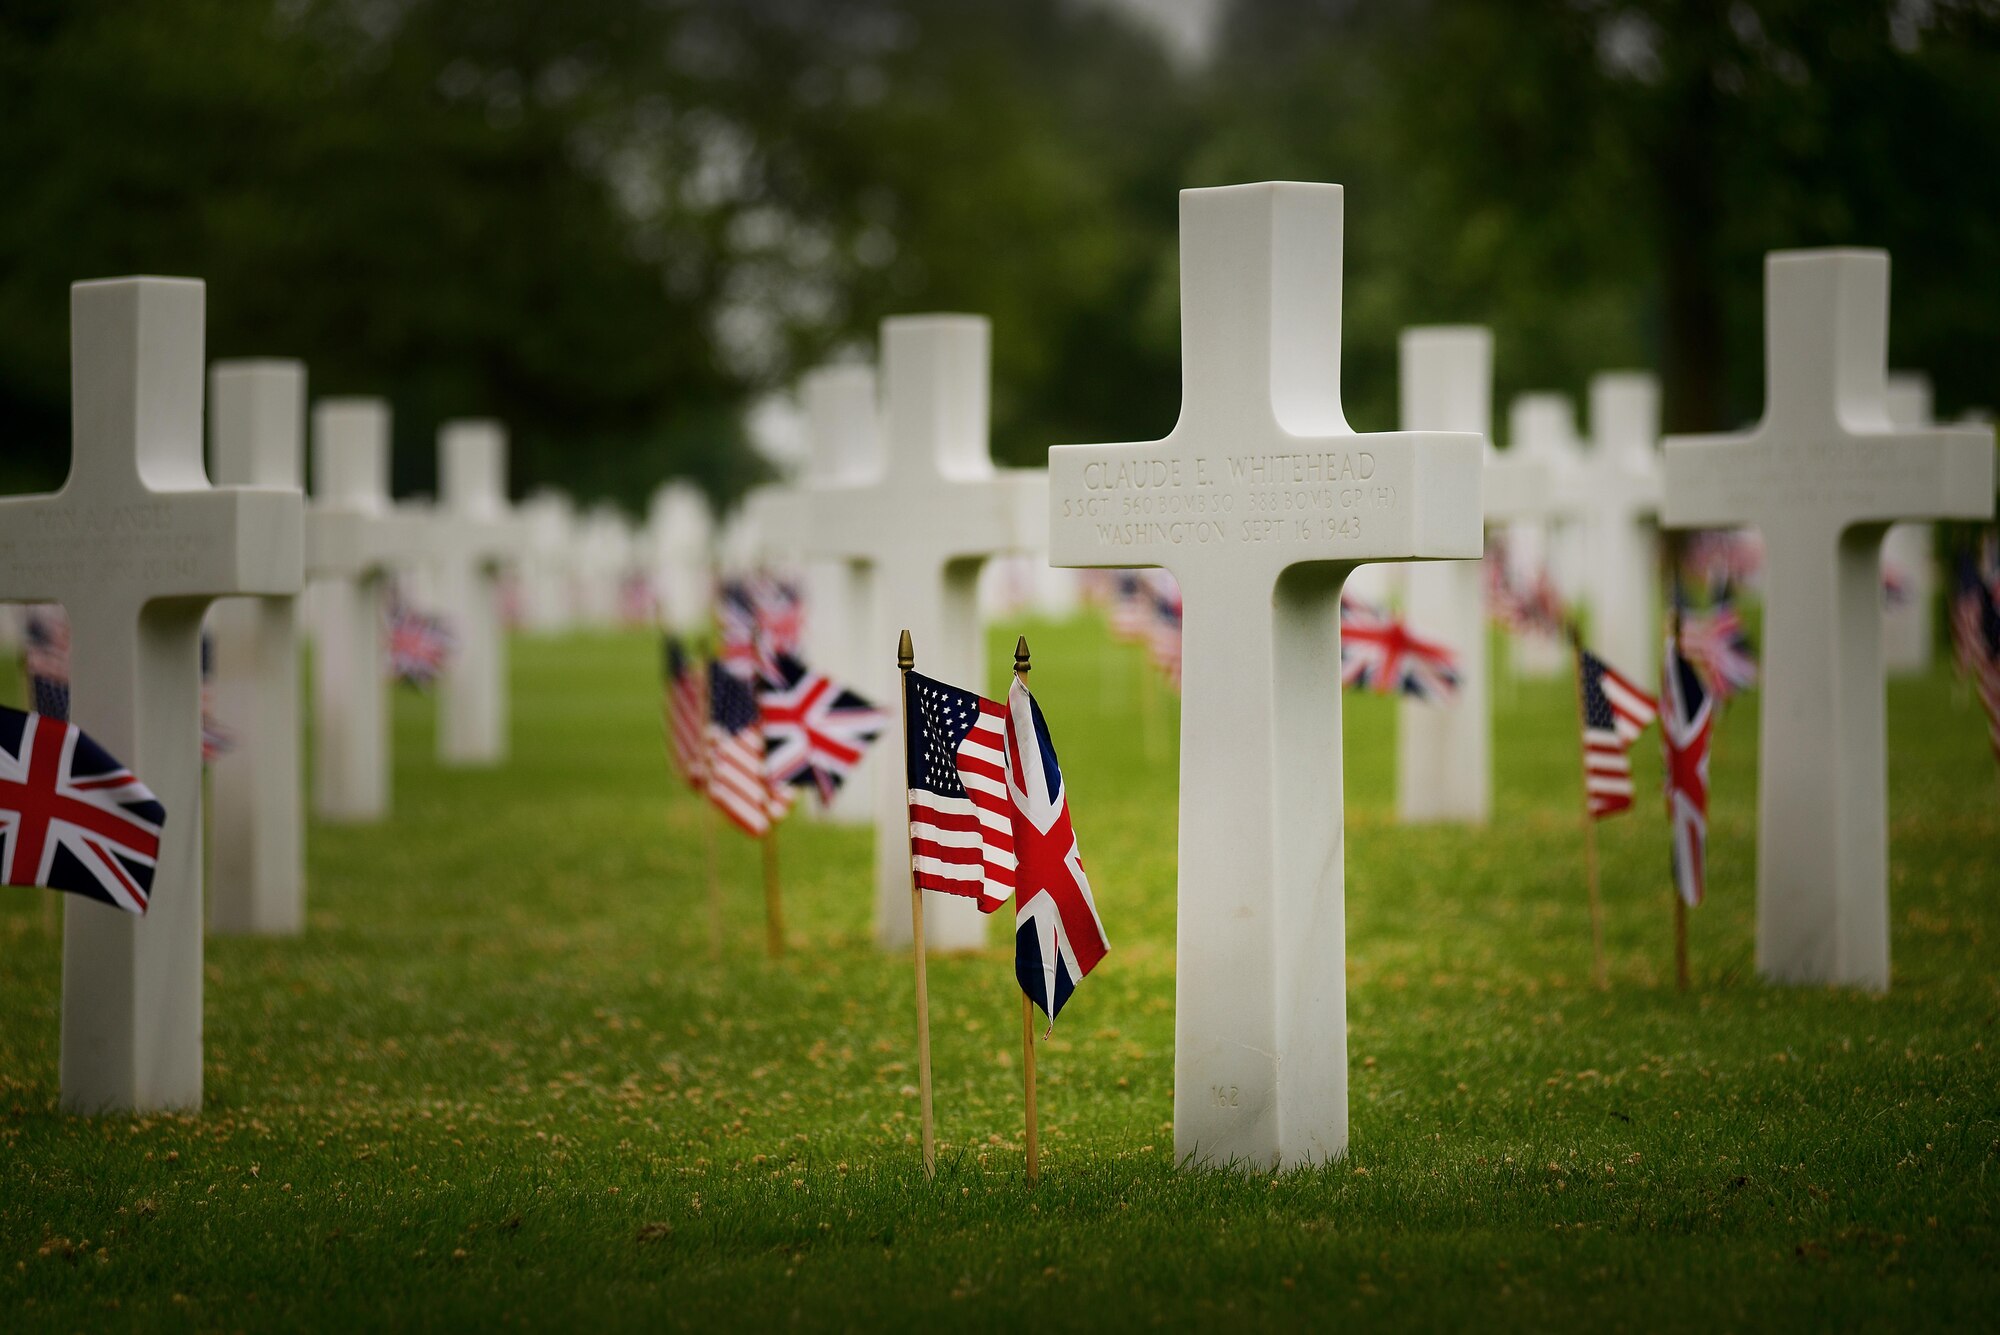 Hundreds gathered May 30, 2016, at Madingley American Cemetery in Cambridge, England, to honor thousands of U.S. Soldiers, Sailors, Marines and Airmen who made the ultimate sacrifice. The cemetery contains 3,812 headstones and a Wall of the Missing, which stands nearly 500 feet in length and contains the names of more than 5,000 men from the U.S. Army, Army Air Corps, Navy, Marine Corps and Coast Guard, who are still listed as missing in action, buried at sea or unaccounted for. (U.S. Air Force photo/Tech. Sgt. Matthew Plew)